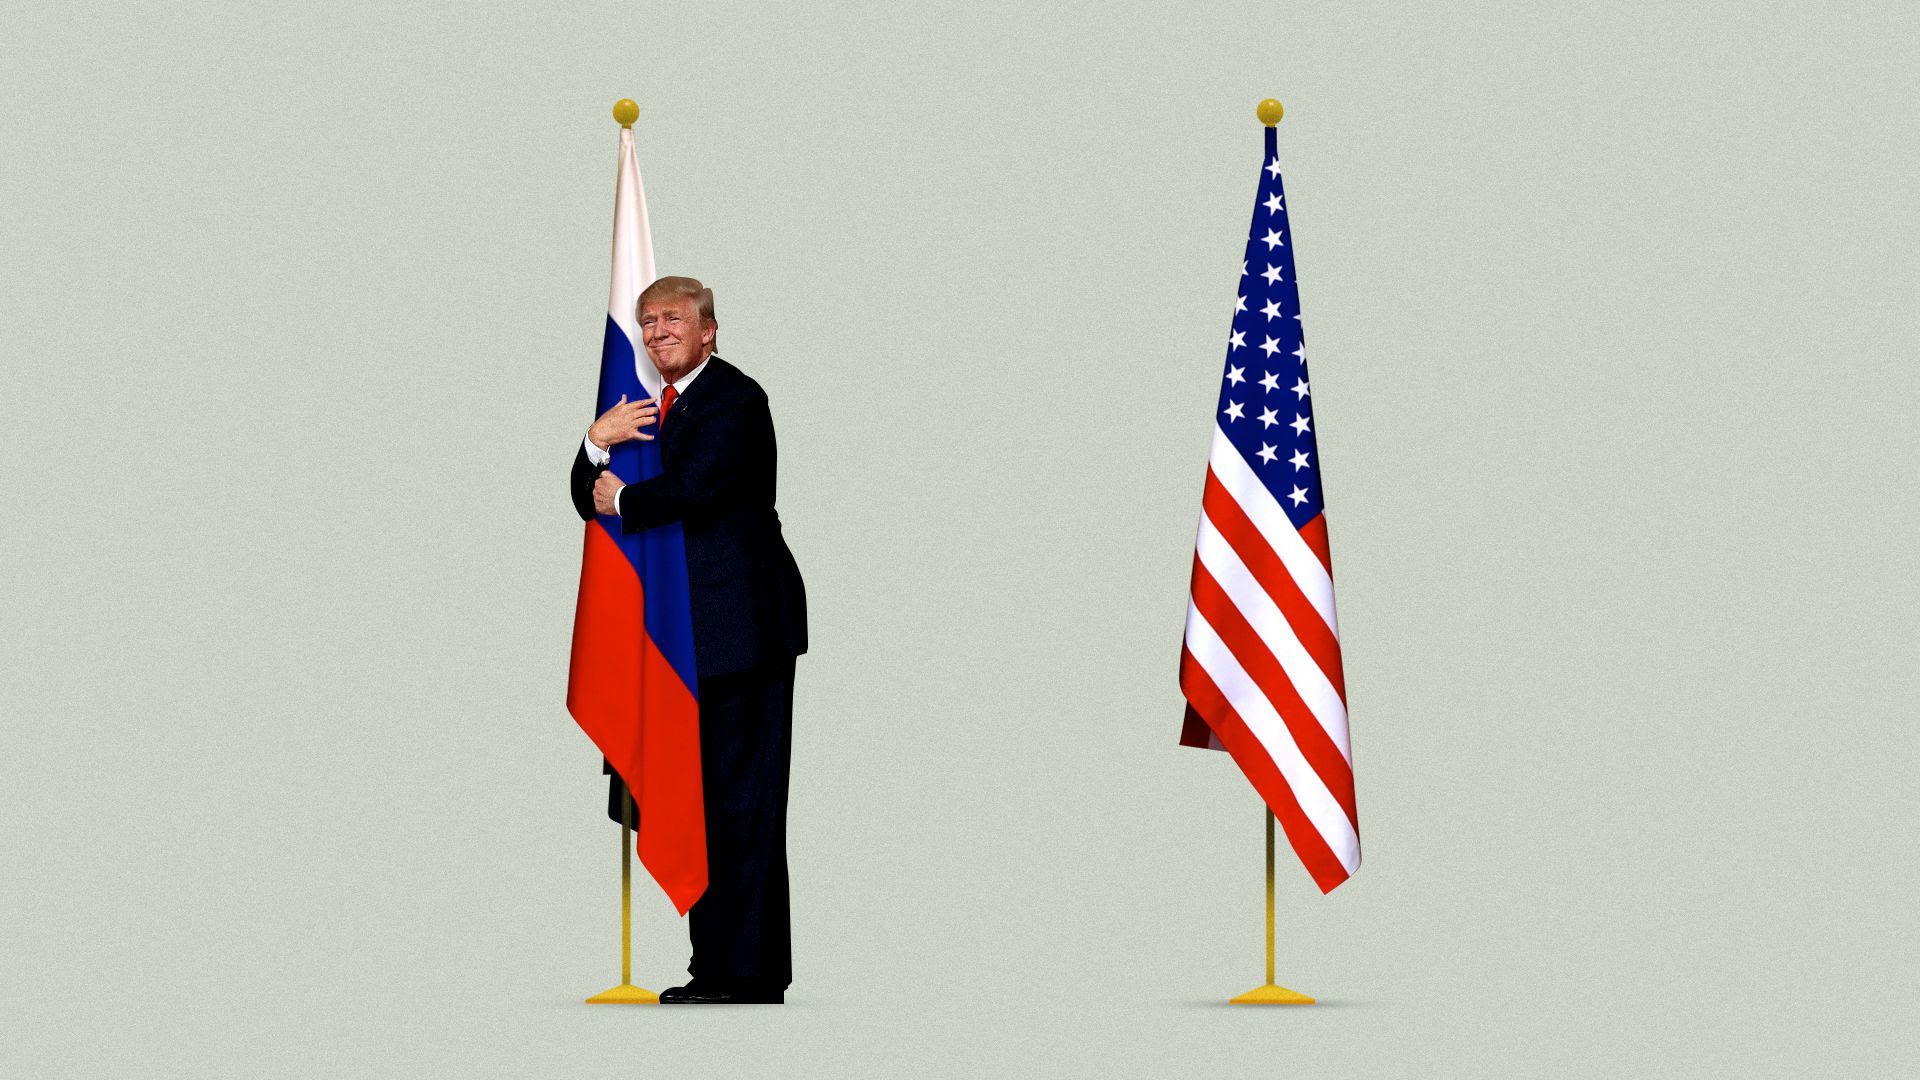 Illustration of Trump hugging a Russian flag while an American flag stands behind him